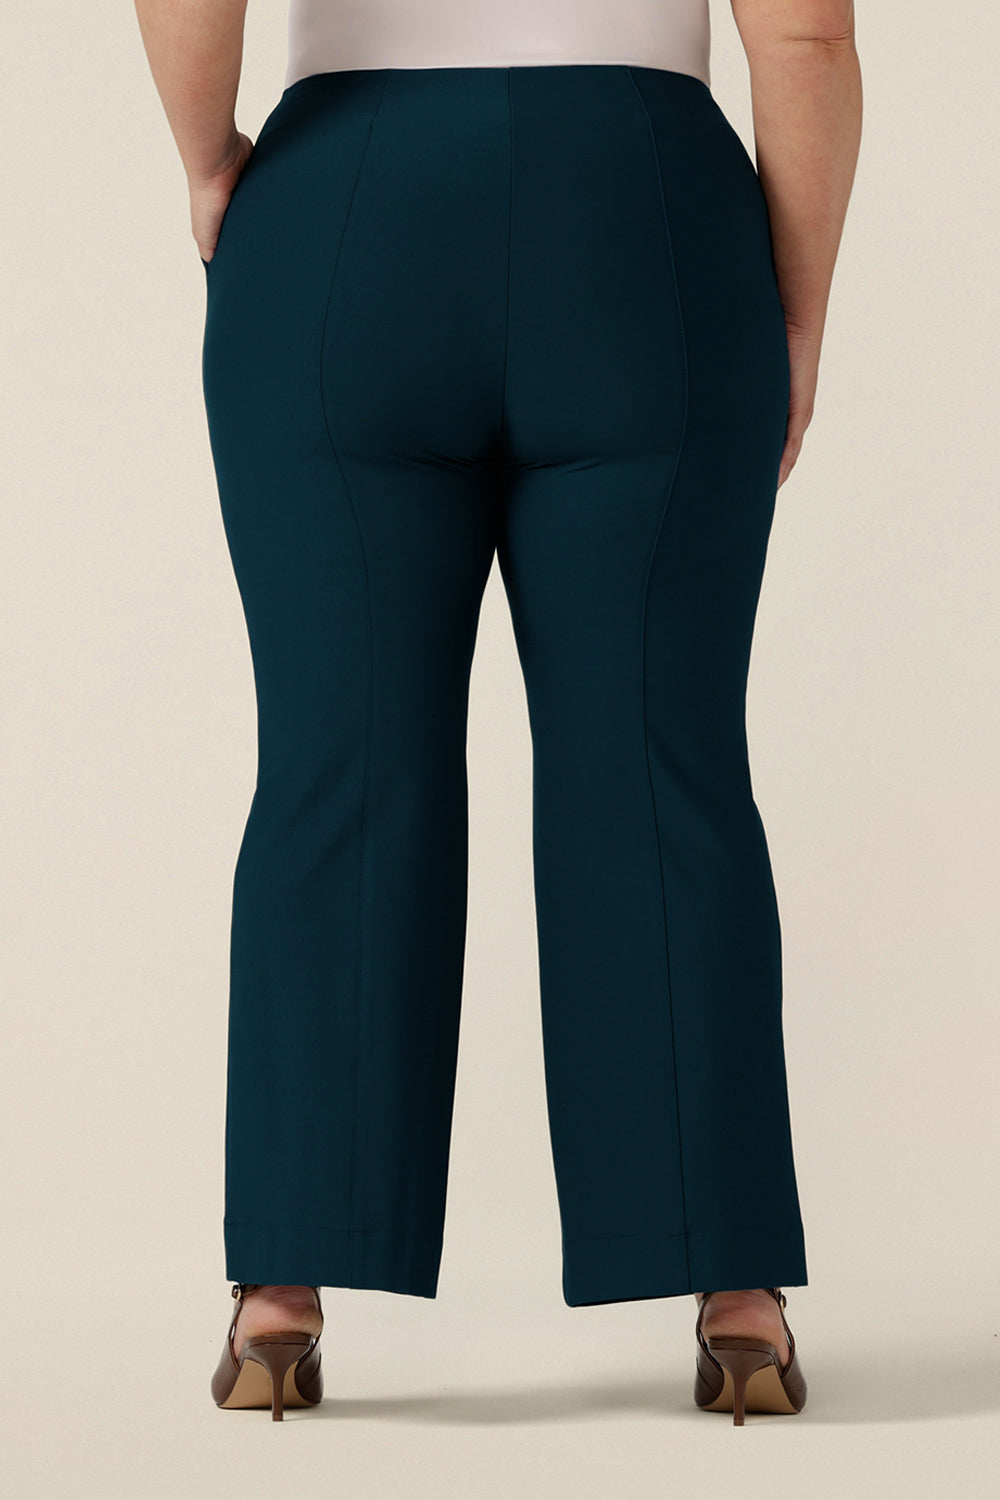 Back view of petrol blue, tailored bootcut pants, size 18. Made in Australia in ponte fabric, these comfortable work pants are great for fuller figure women - shop in sizes 8 to 24.